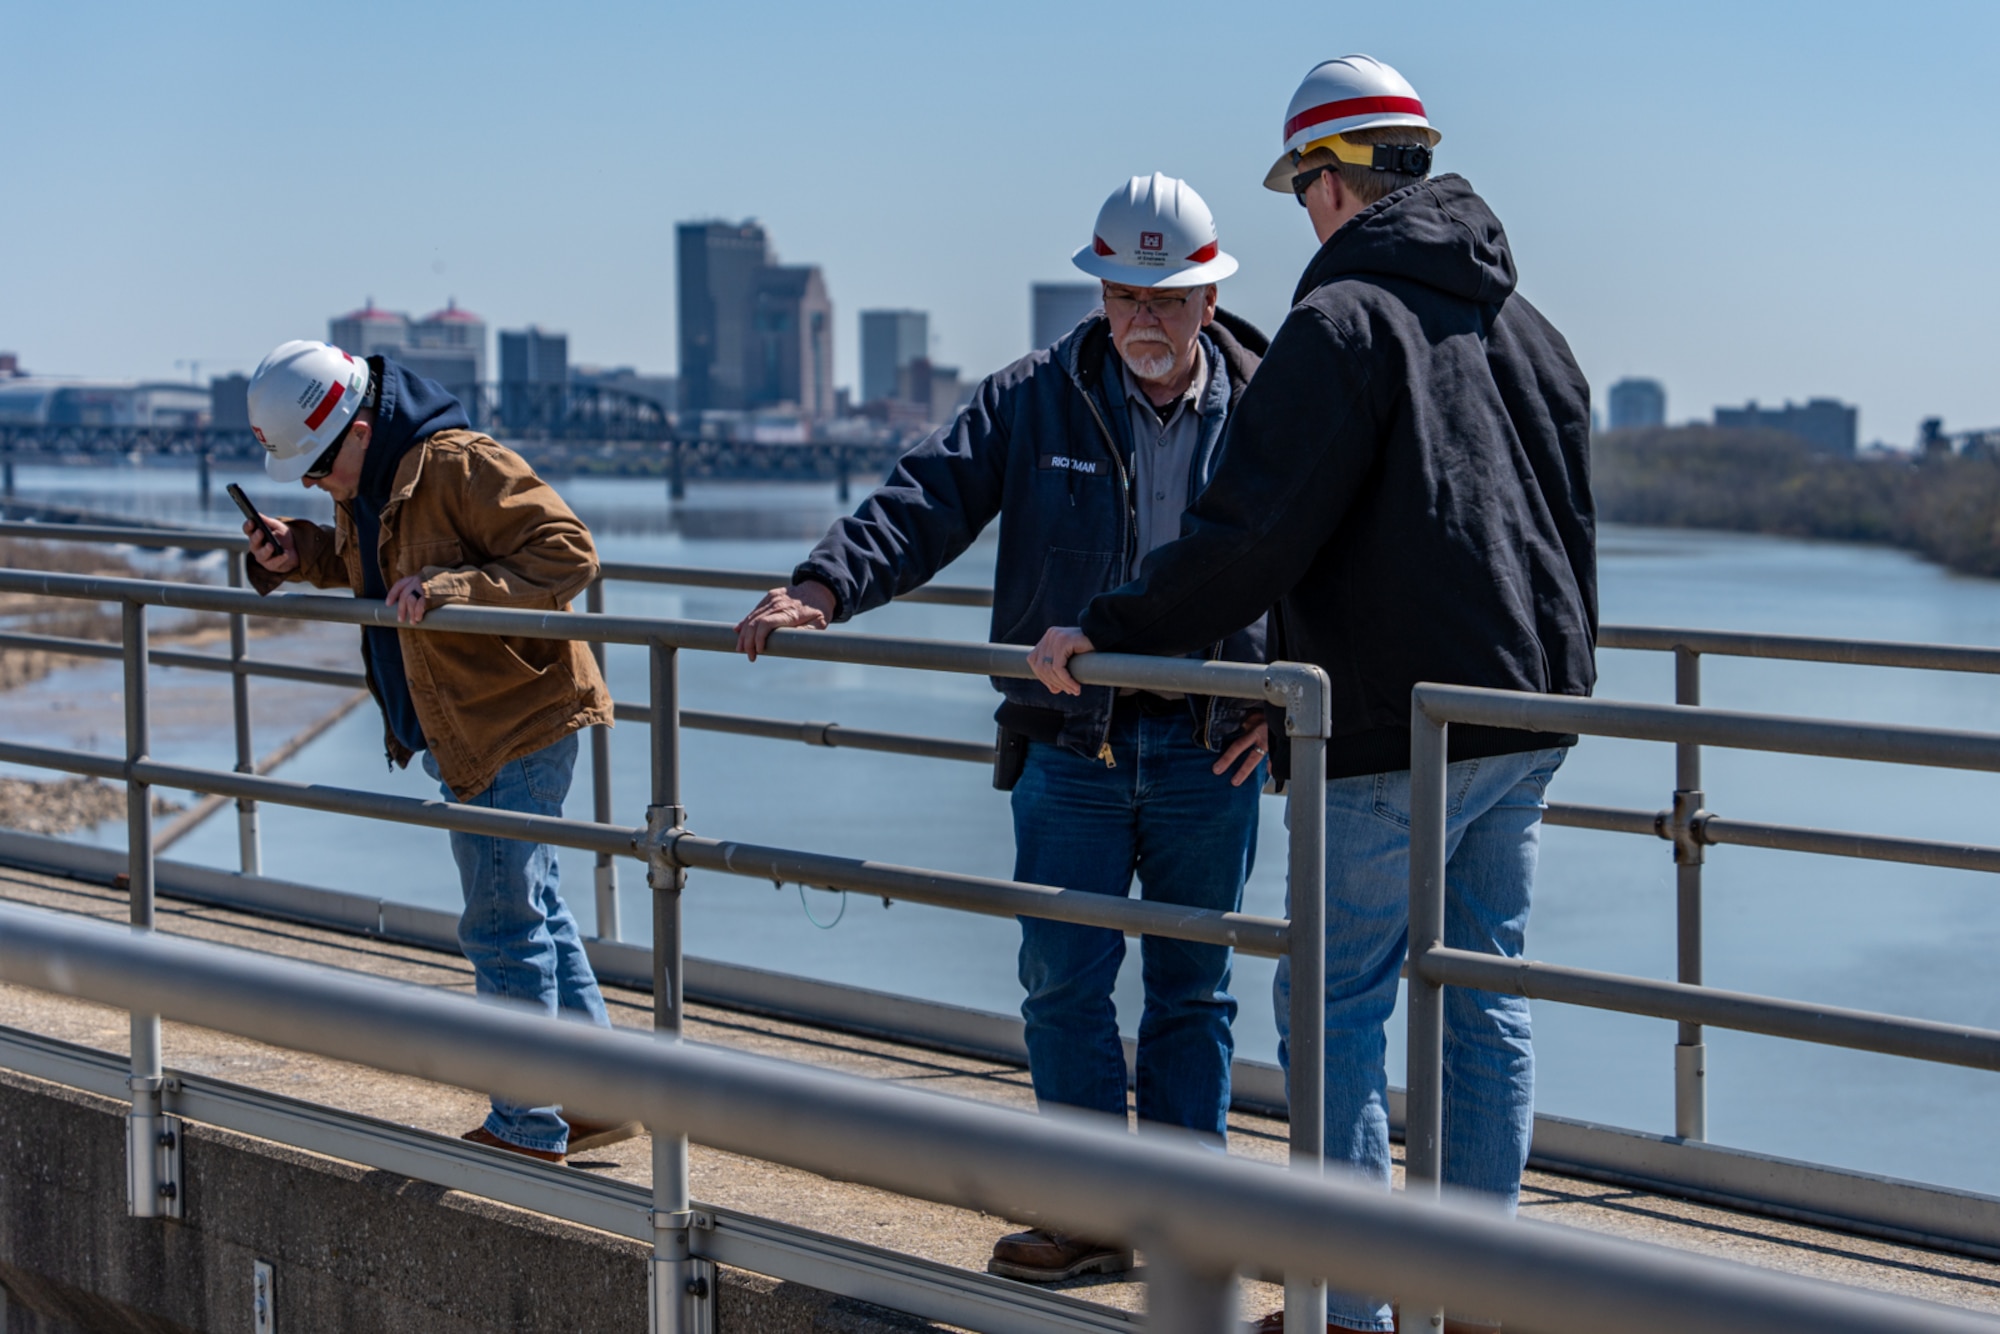 USACE Louisville District Locks and Dam Operations Manager Brad Stout (left), McAlpine Locks and Dam Lockmaster Jay Rickman and Locks and Dams Assistant Operations  Manager Davis Mattingly discuss the effects of barge hydrodynamics during offloading operations and the best procedure for safely removing the remaining coal, March 28.